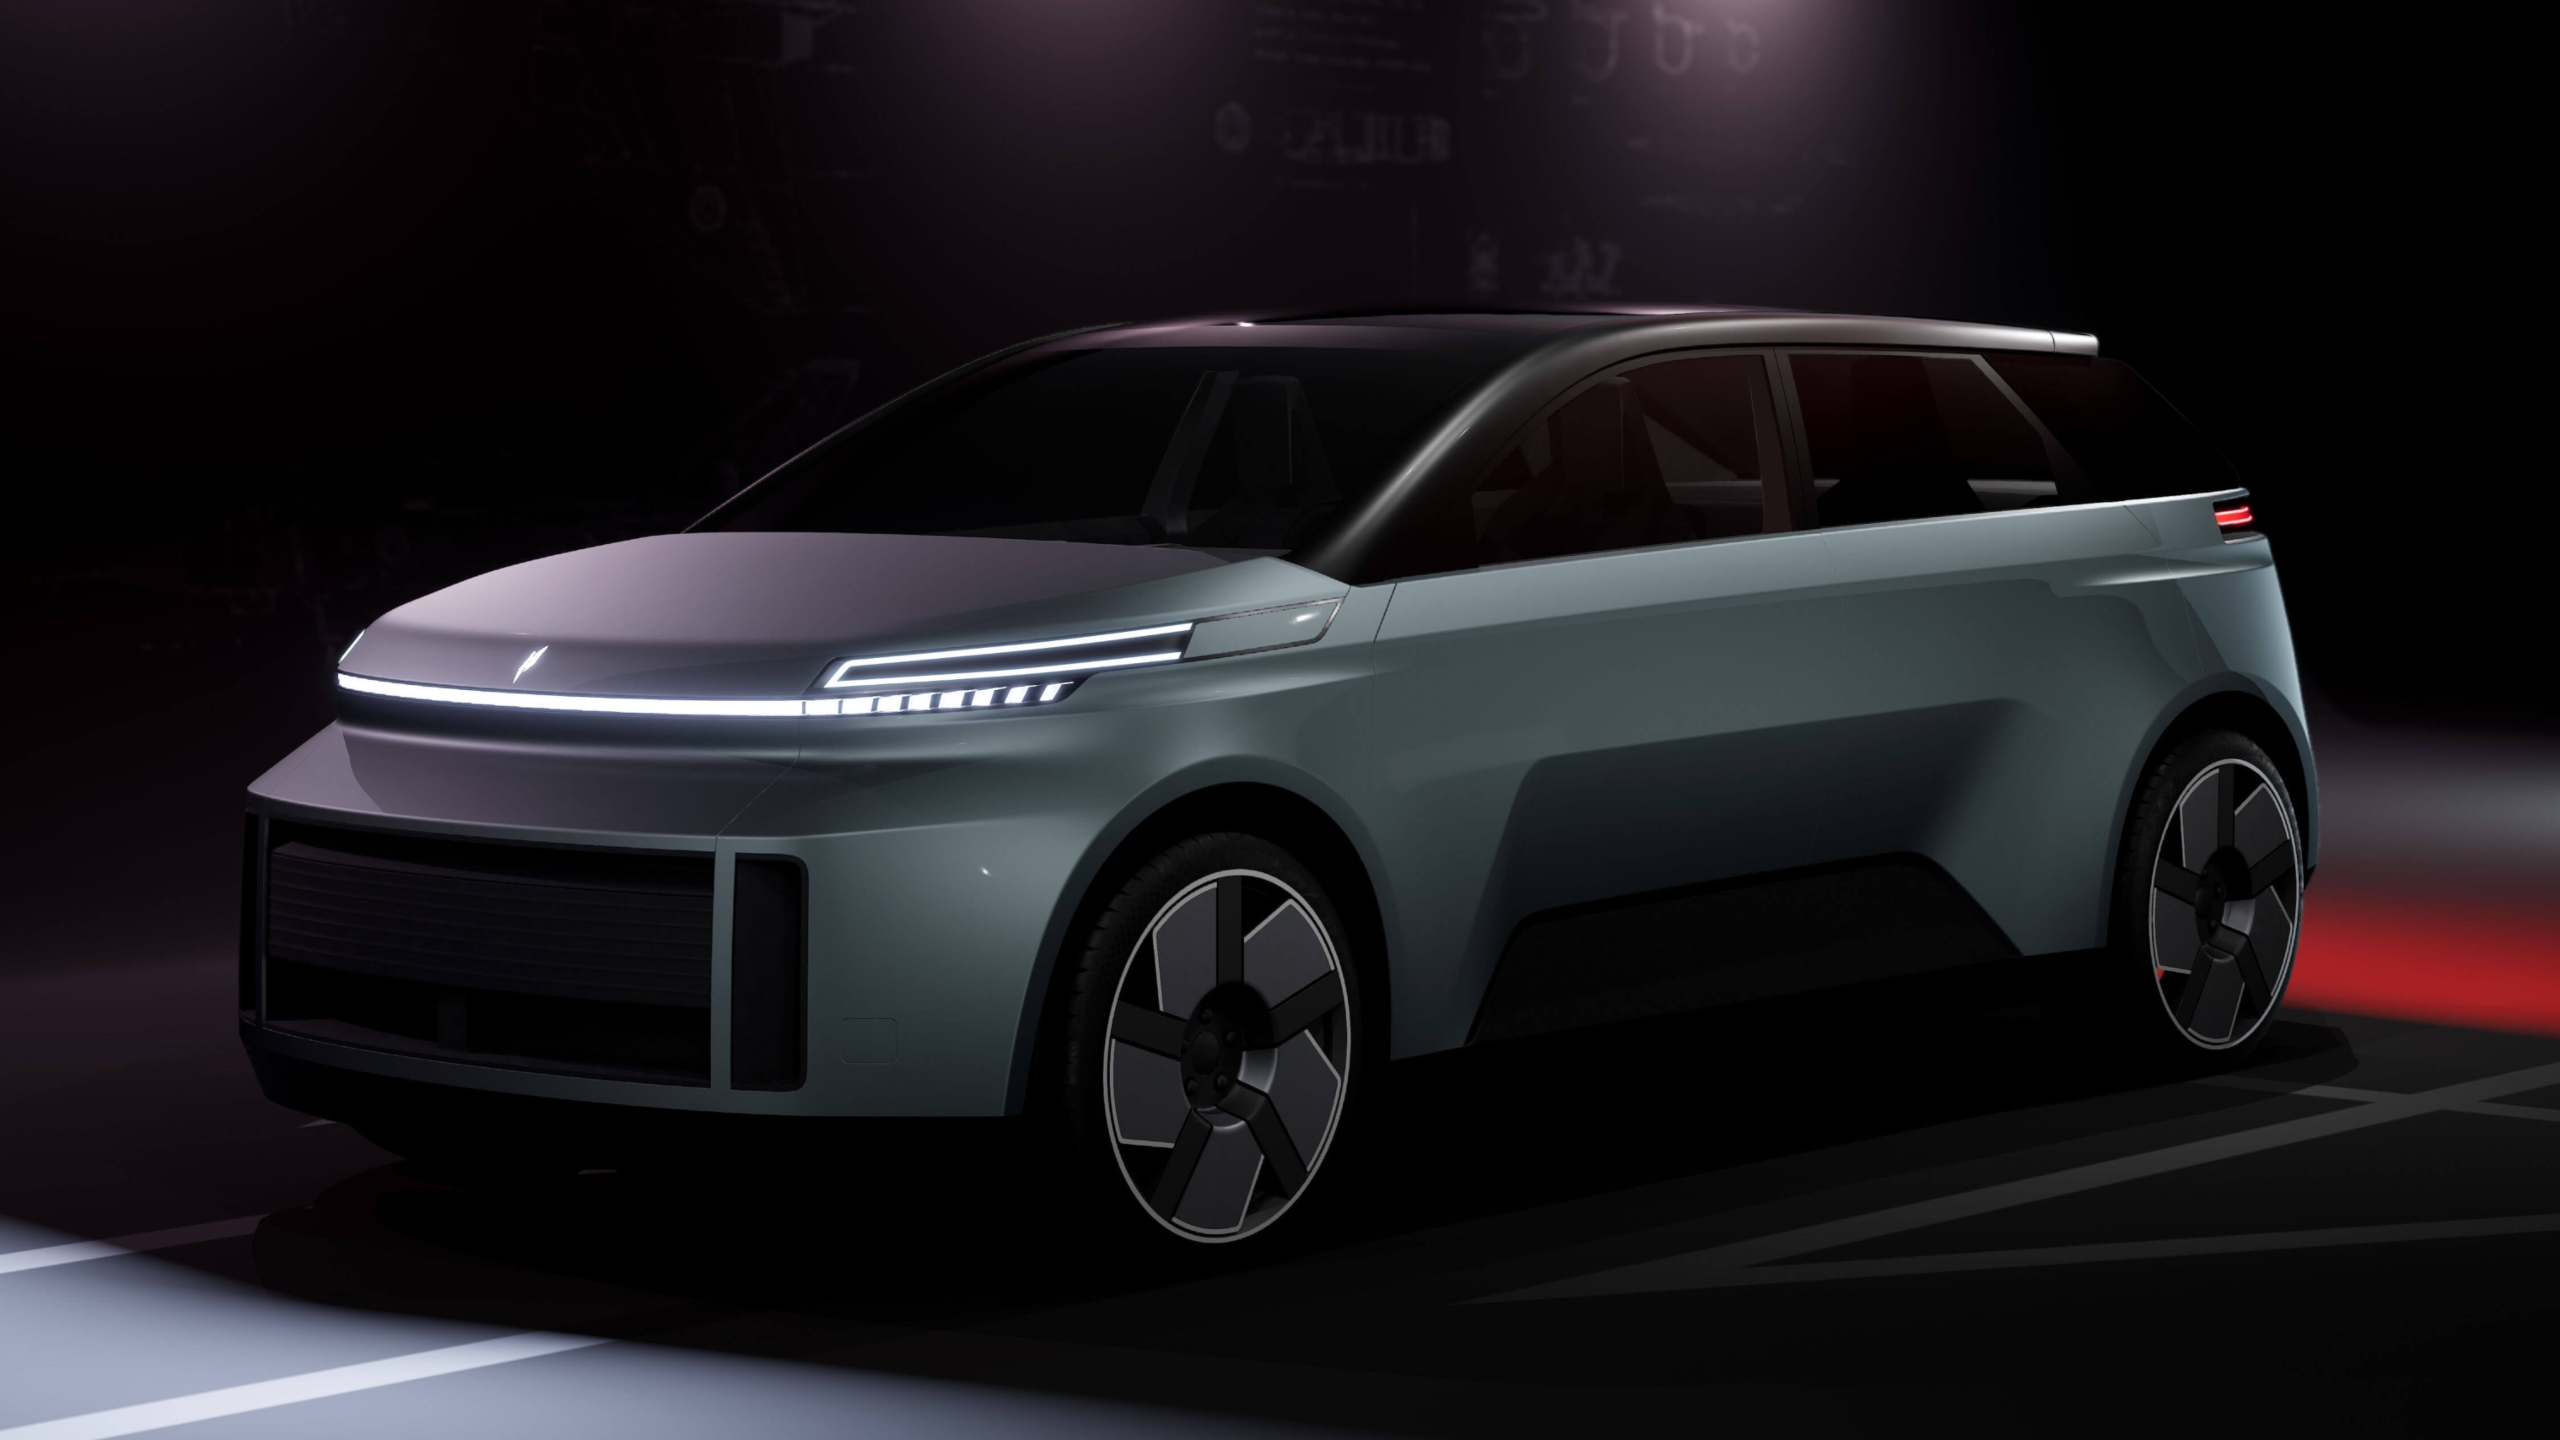 Canadianmade ‘Project Arrow’ EV debuts at CES 2023